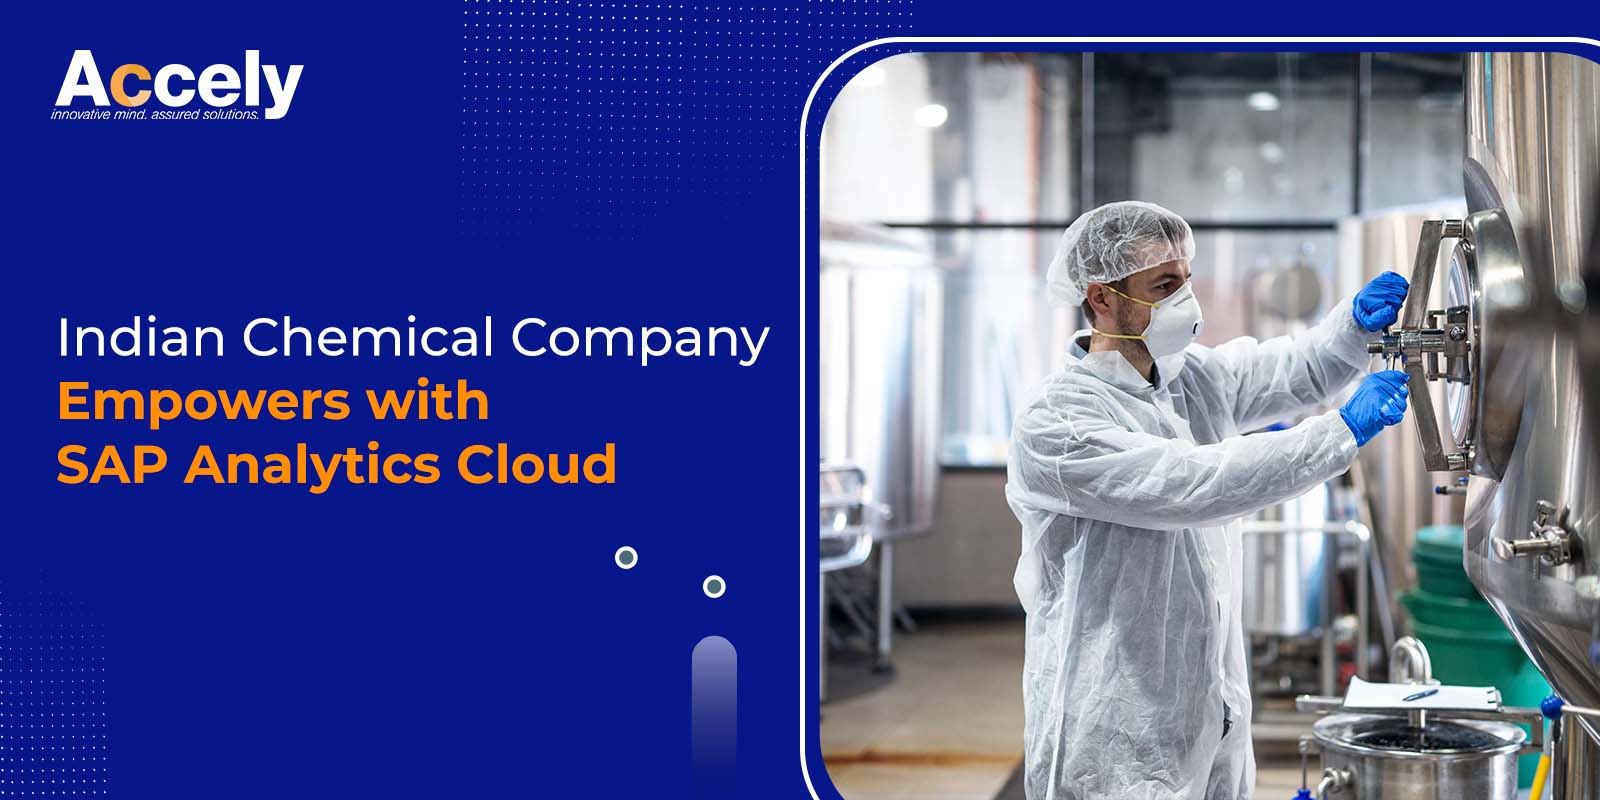 Indian Chemical Company Empowers with SAP Analytics Cloud